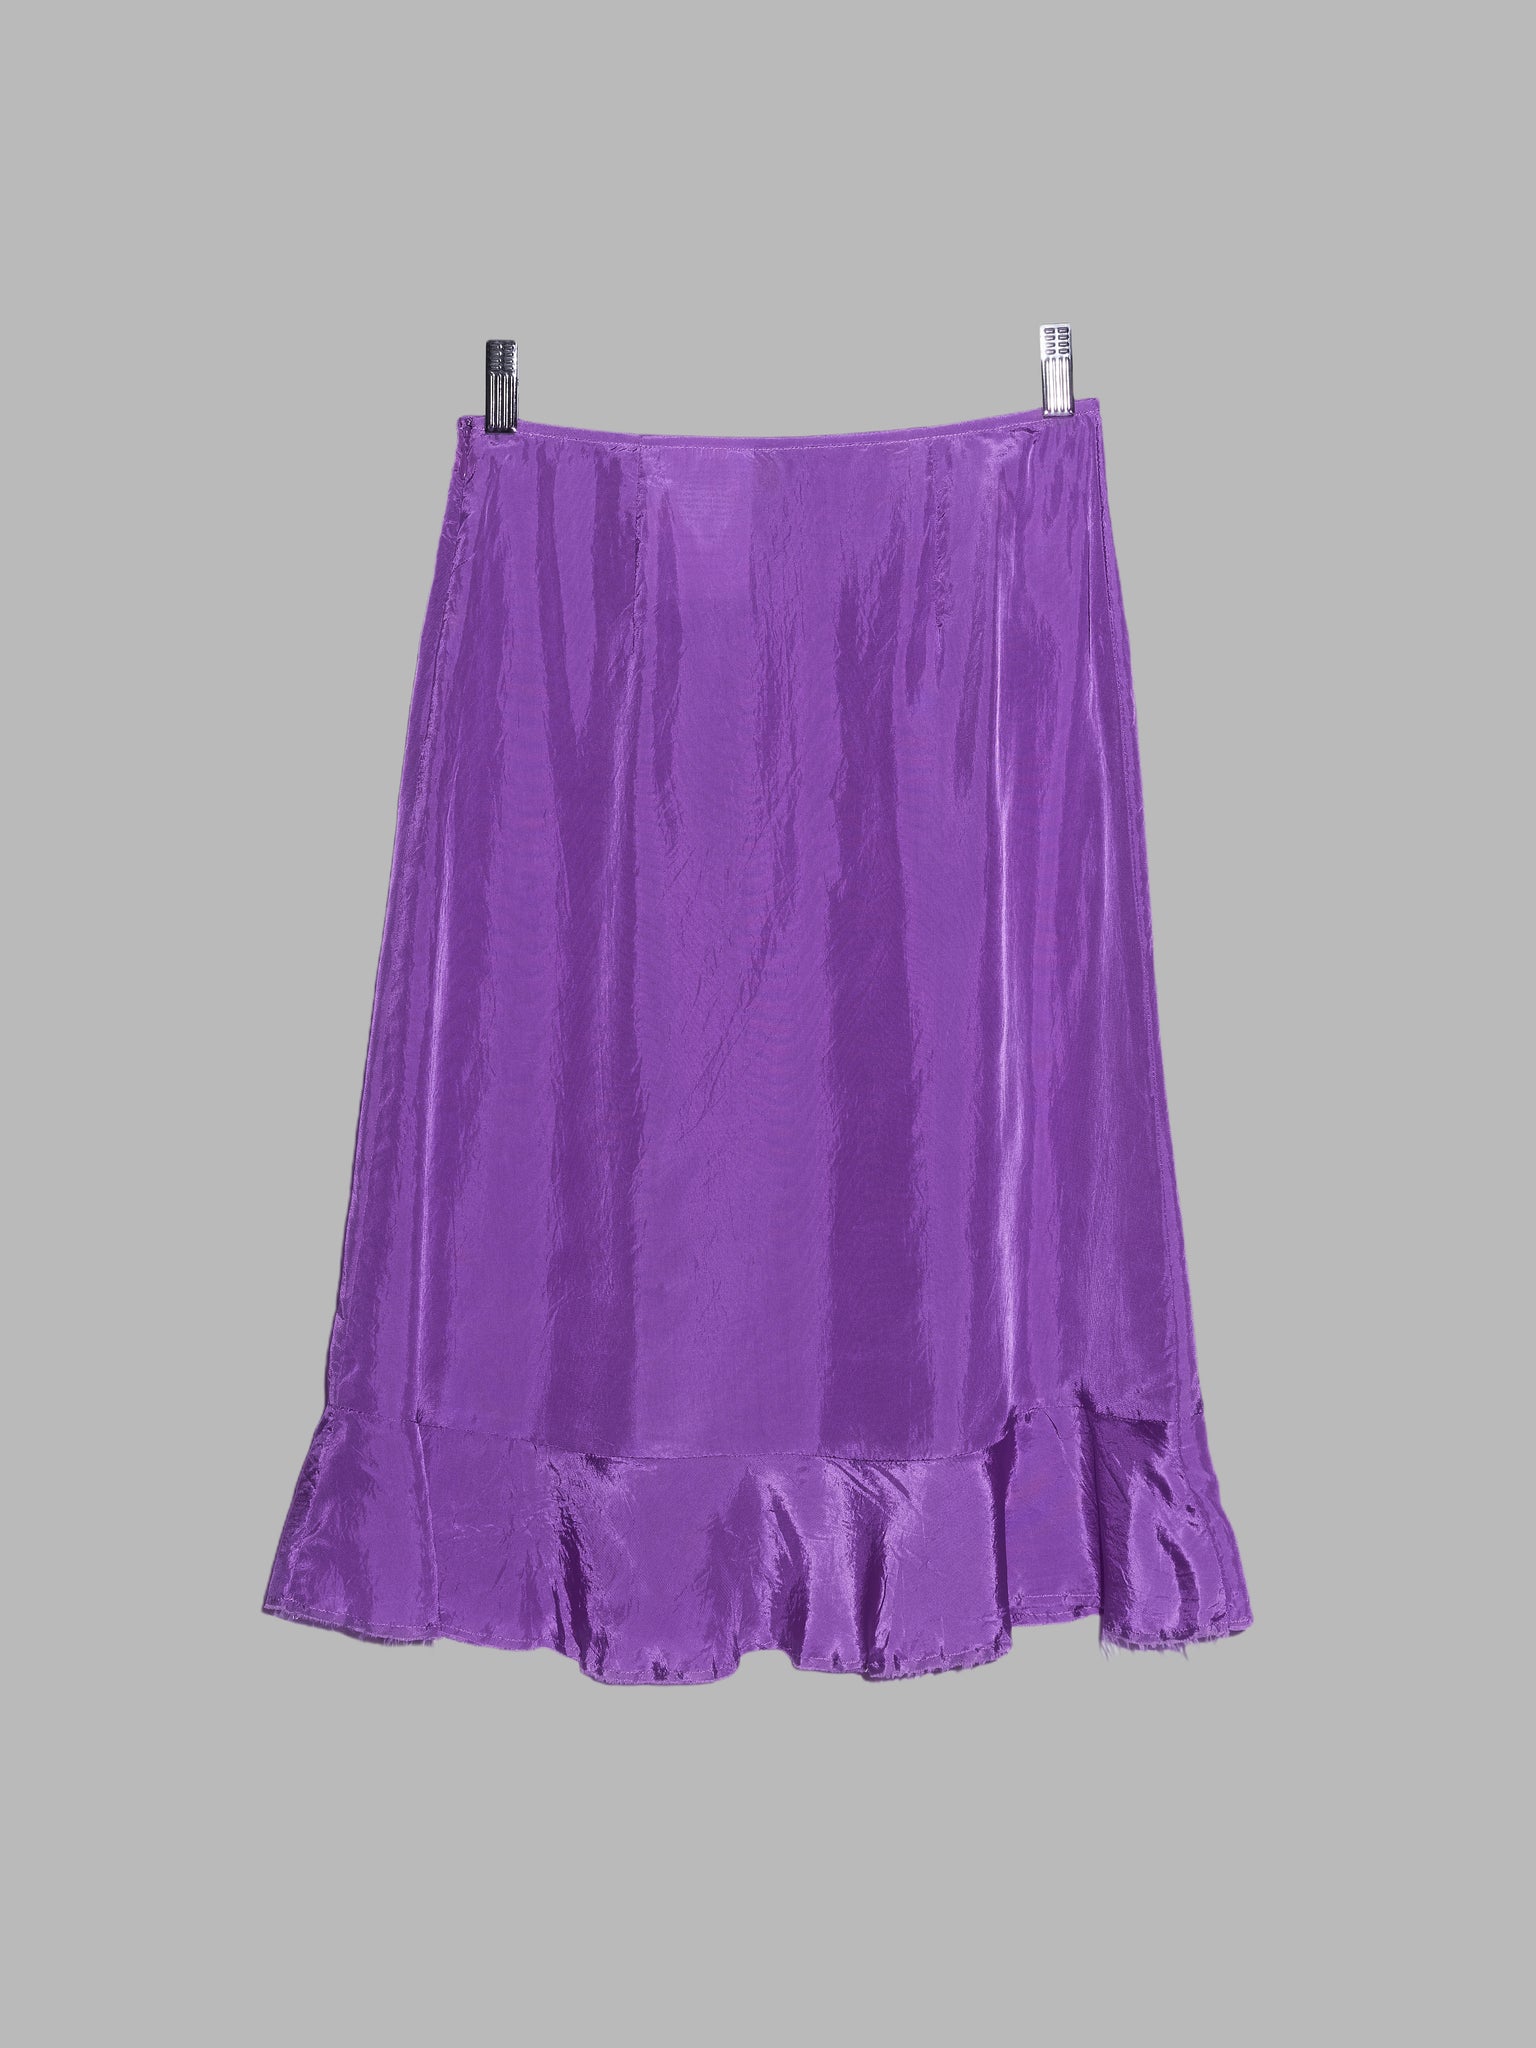 Tricot Comme des Garcons 2003 purple satin flared skirt with raw hem - S